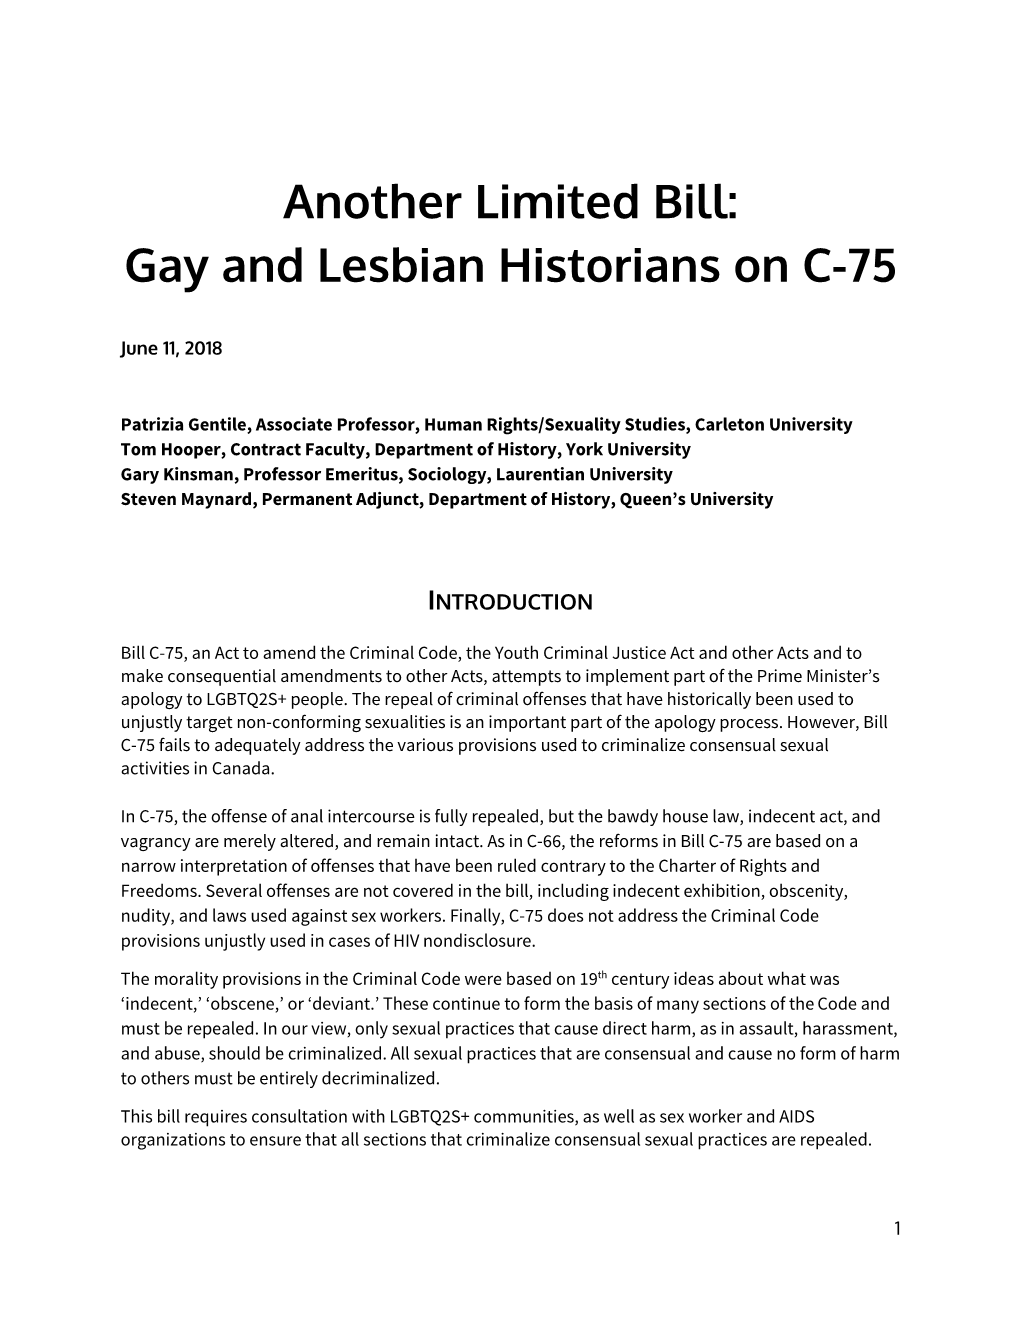 Gay and Lesbian Historians on C-75